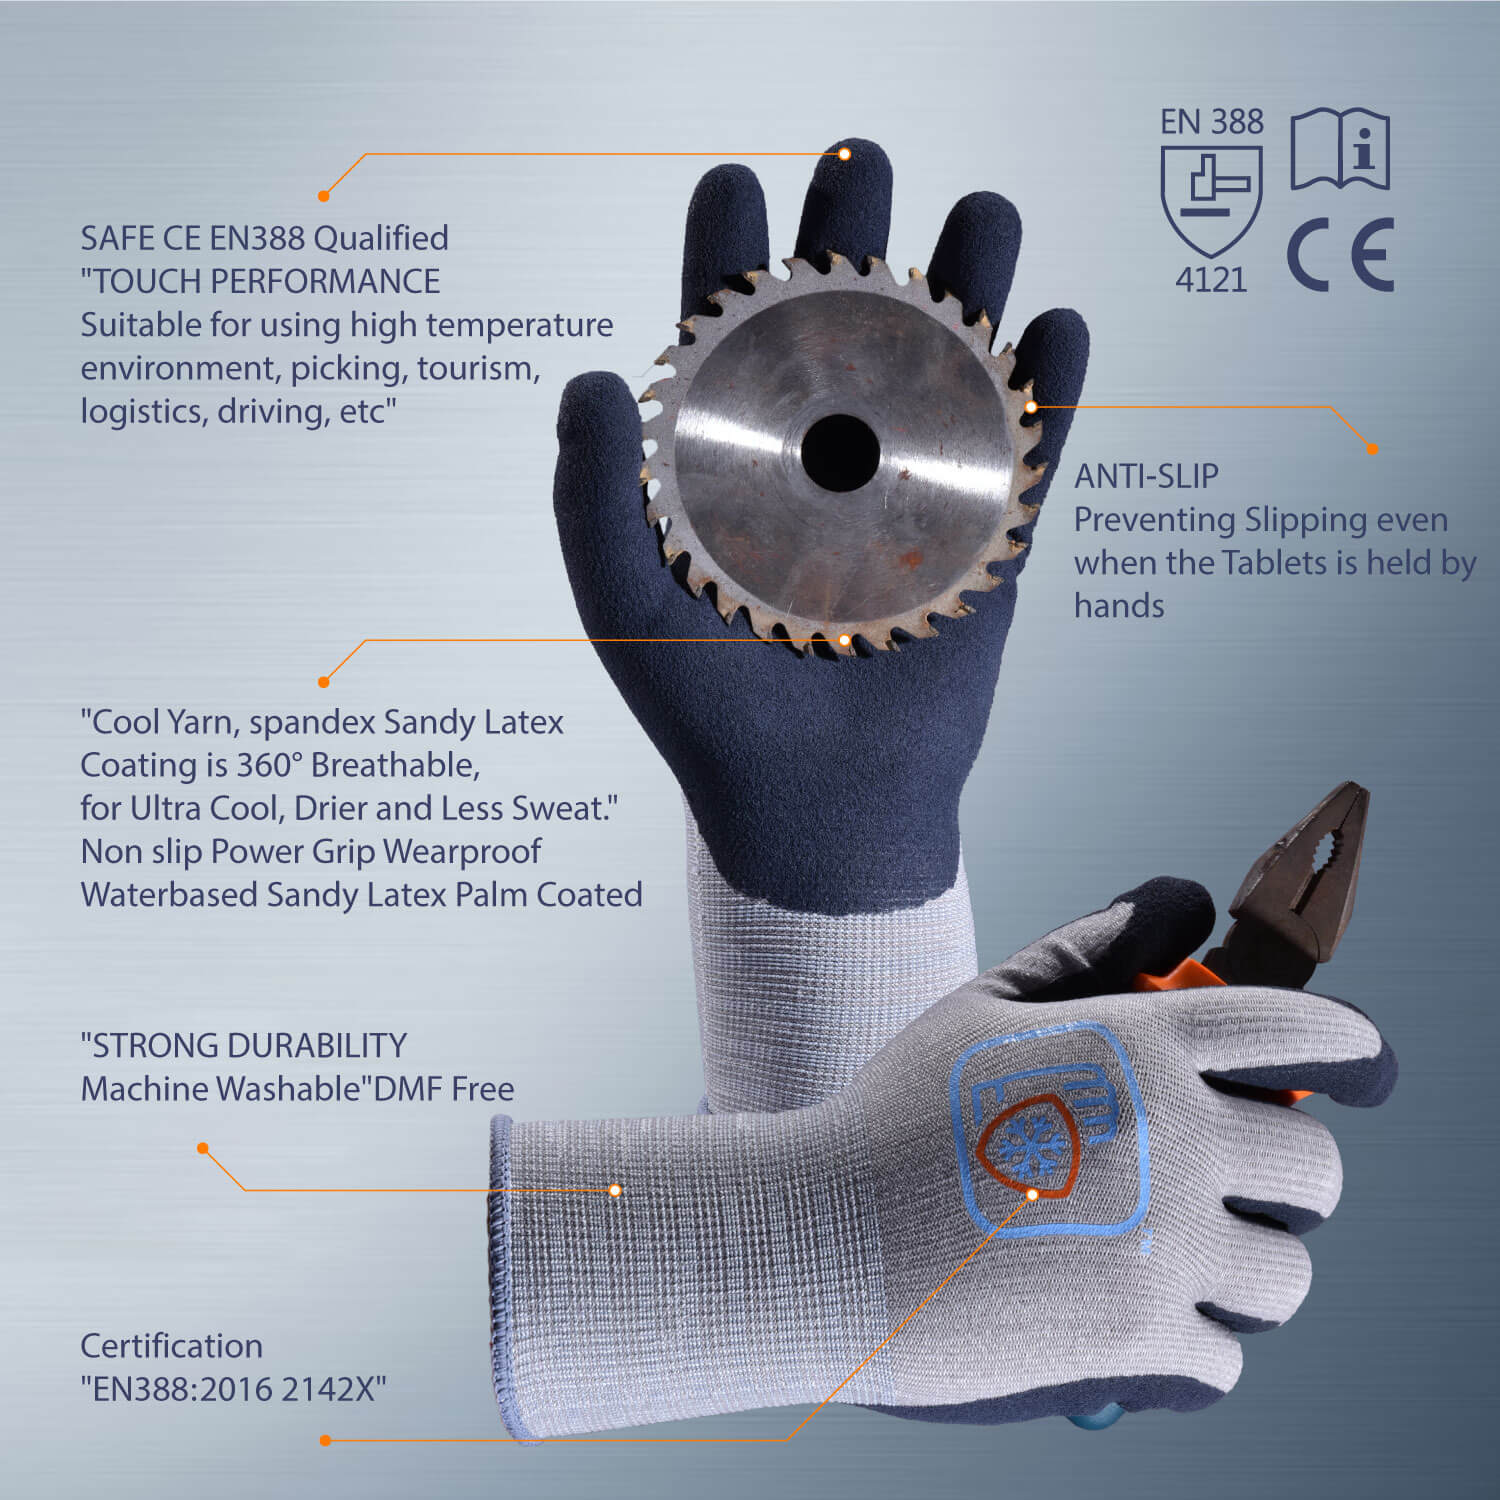 SAFEYEAR Latex Coated Safety Gloves, Gardening Gloves Waterproof and Anti-Slip, Work Gloves for Construction,Warehouse